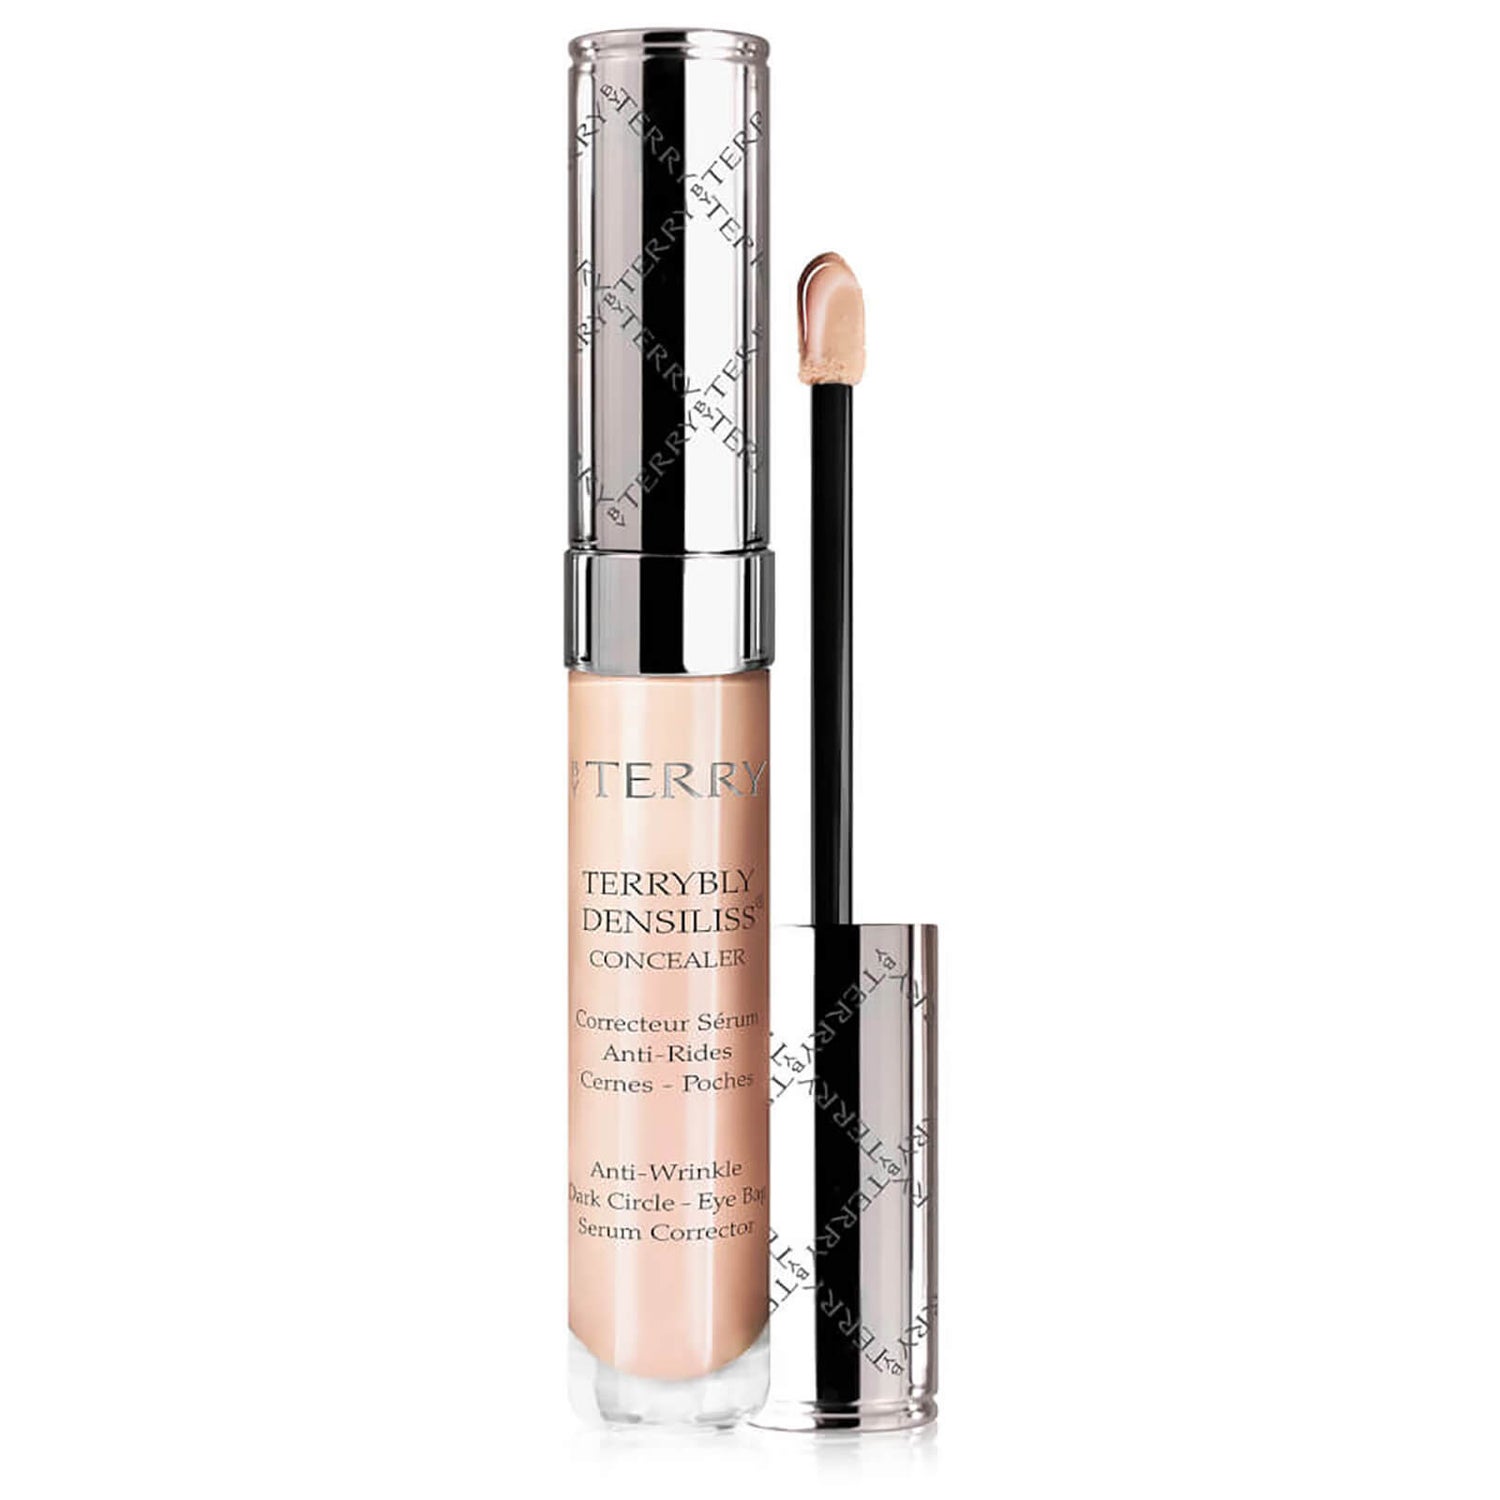 BY TERRY Terrybly Densiliss Concealer (7 ml.)